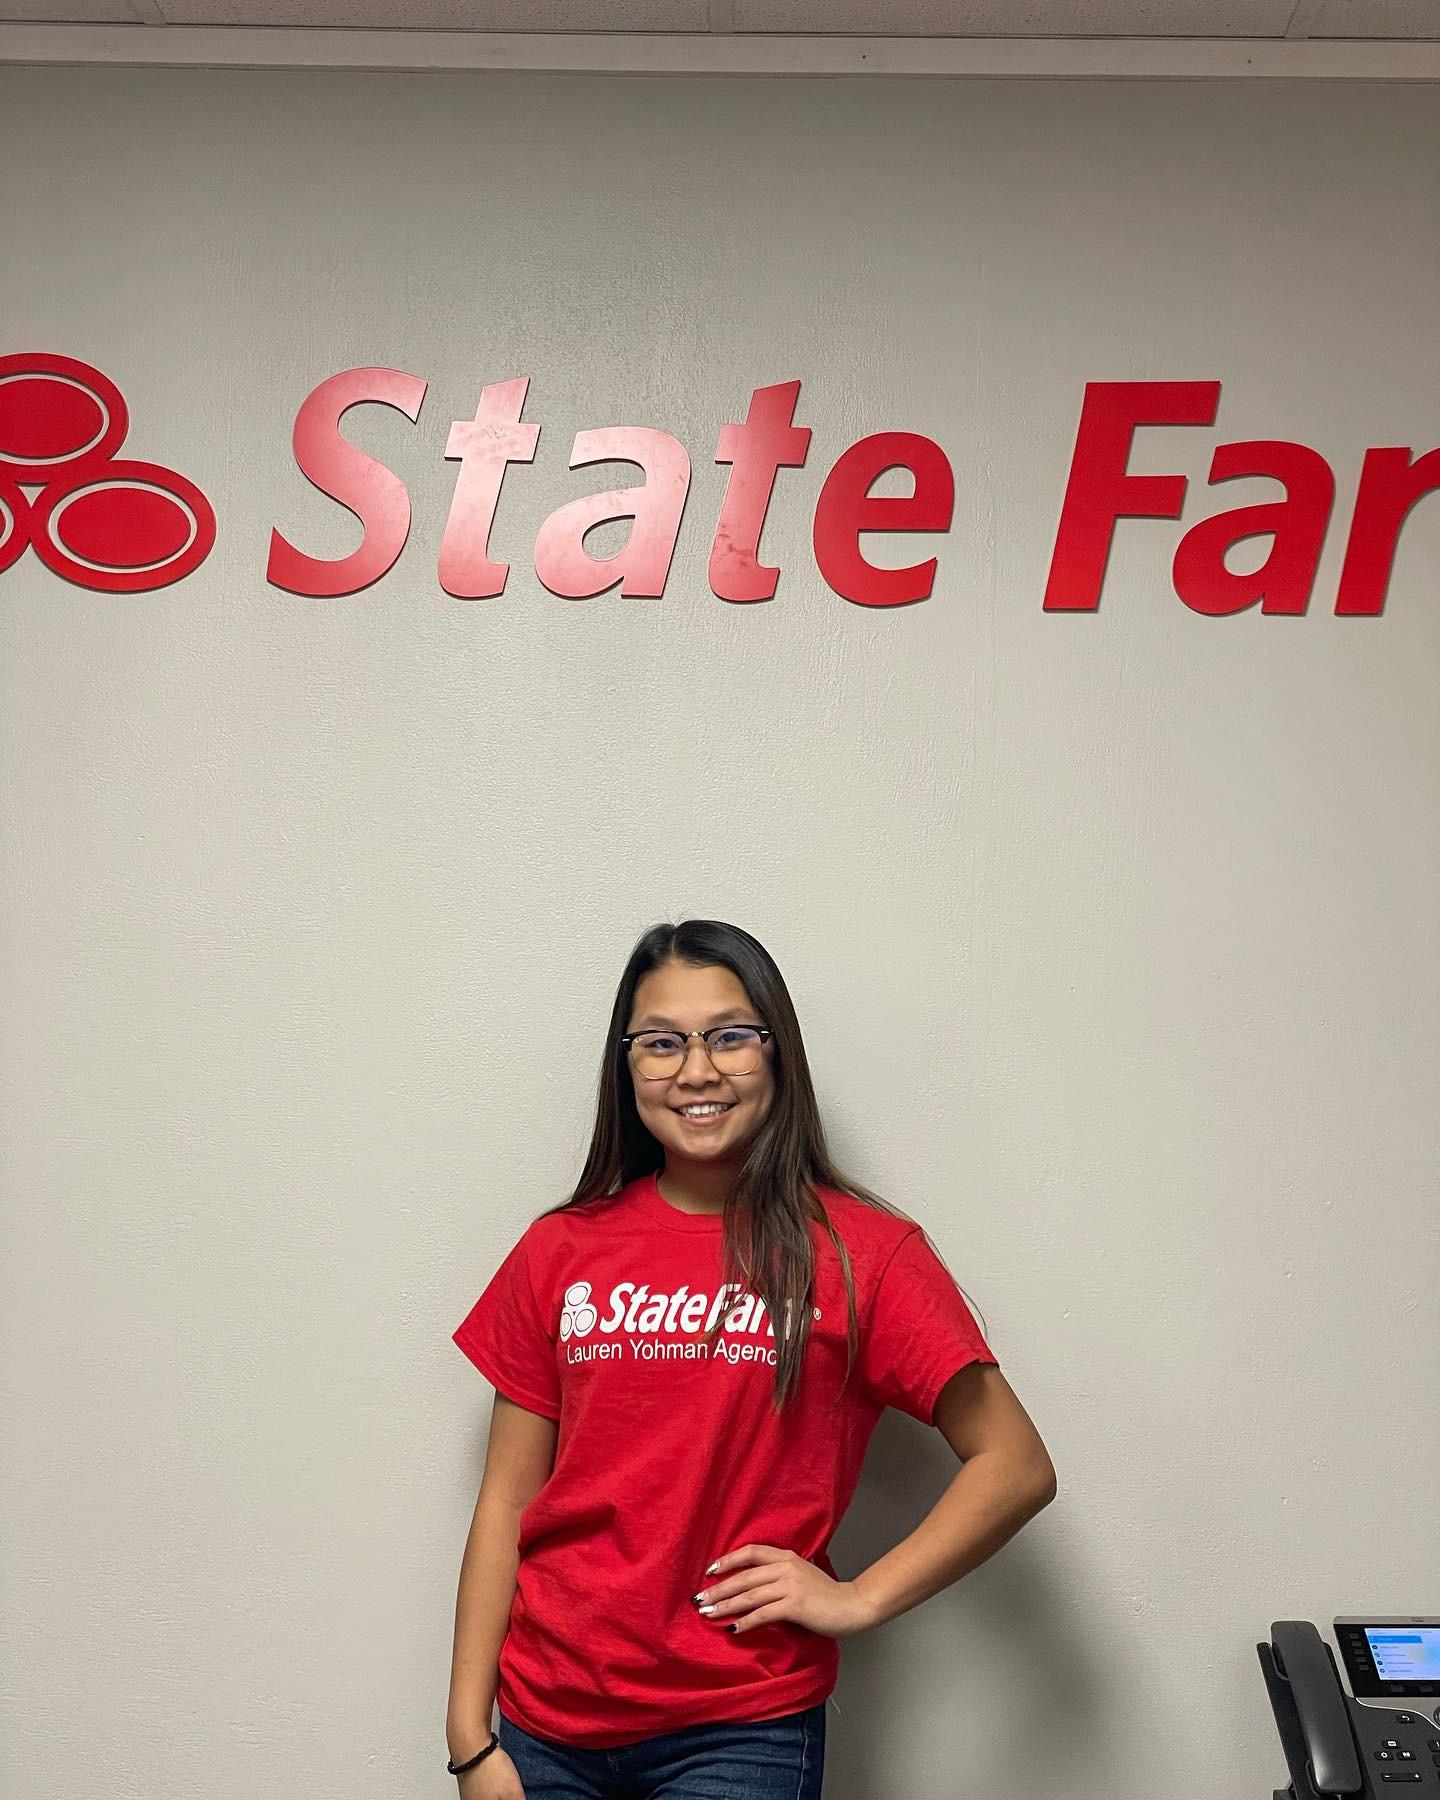 With the Drive Safe & Save app you can be gifted with a discount just for being a safe driver! Lauren Yohman - State Farm Insurance Agent Uniontown (724)592-6308